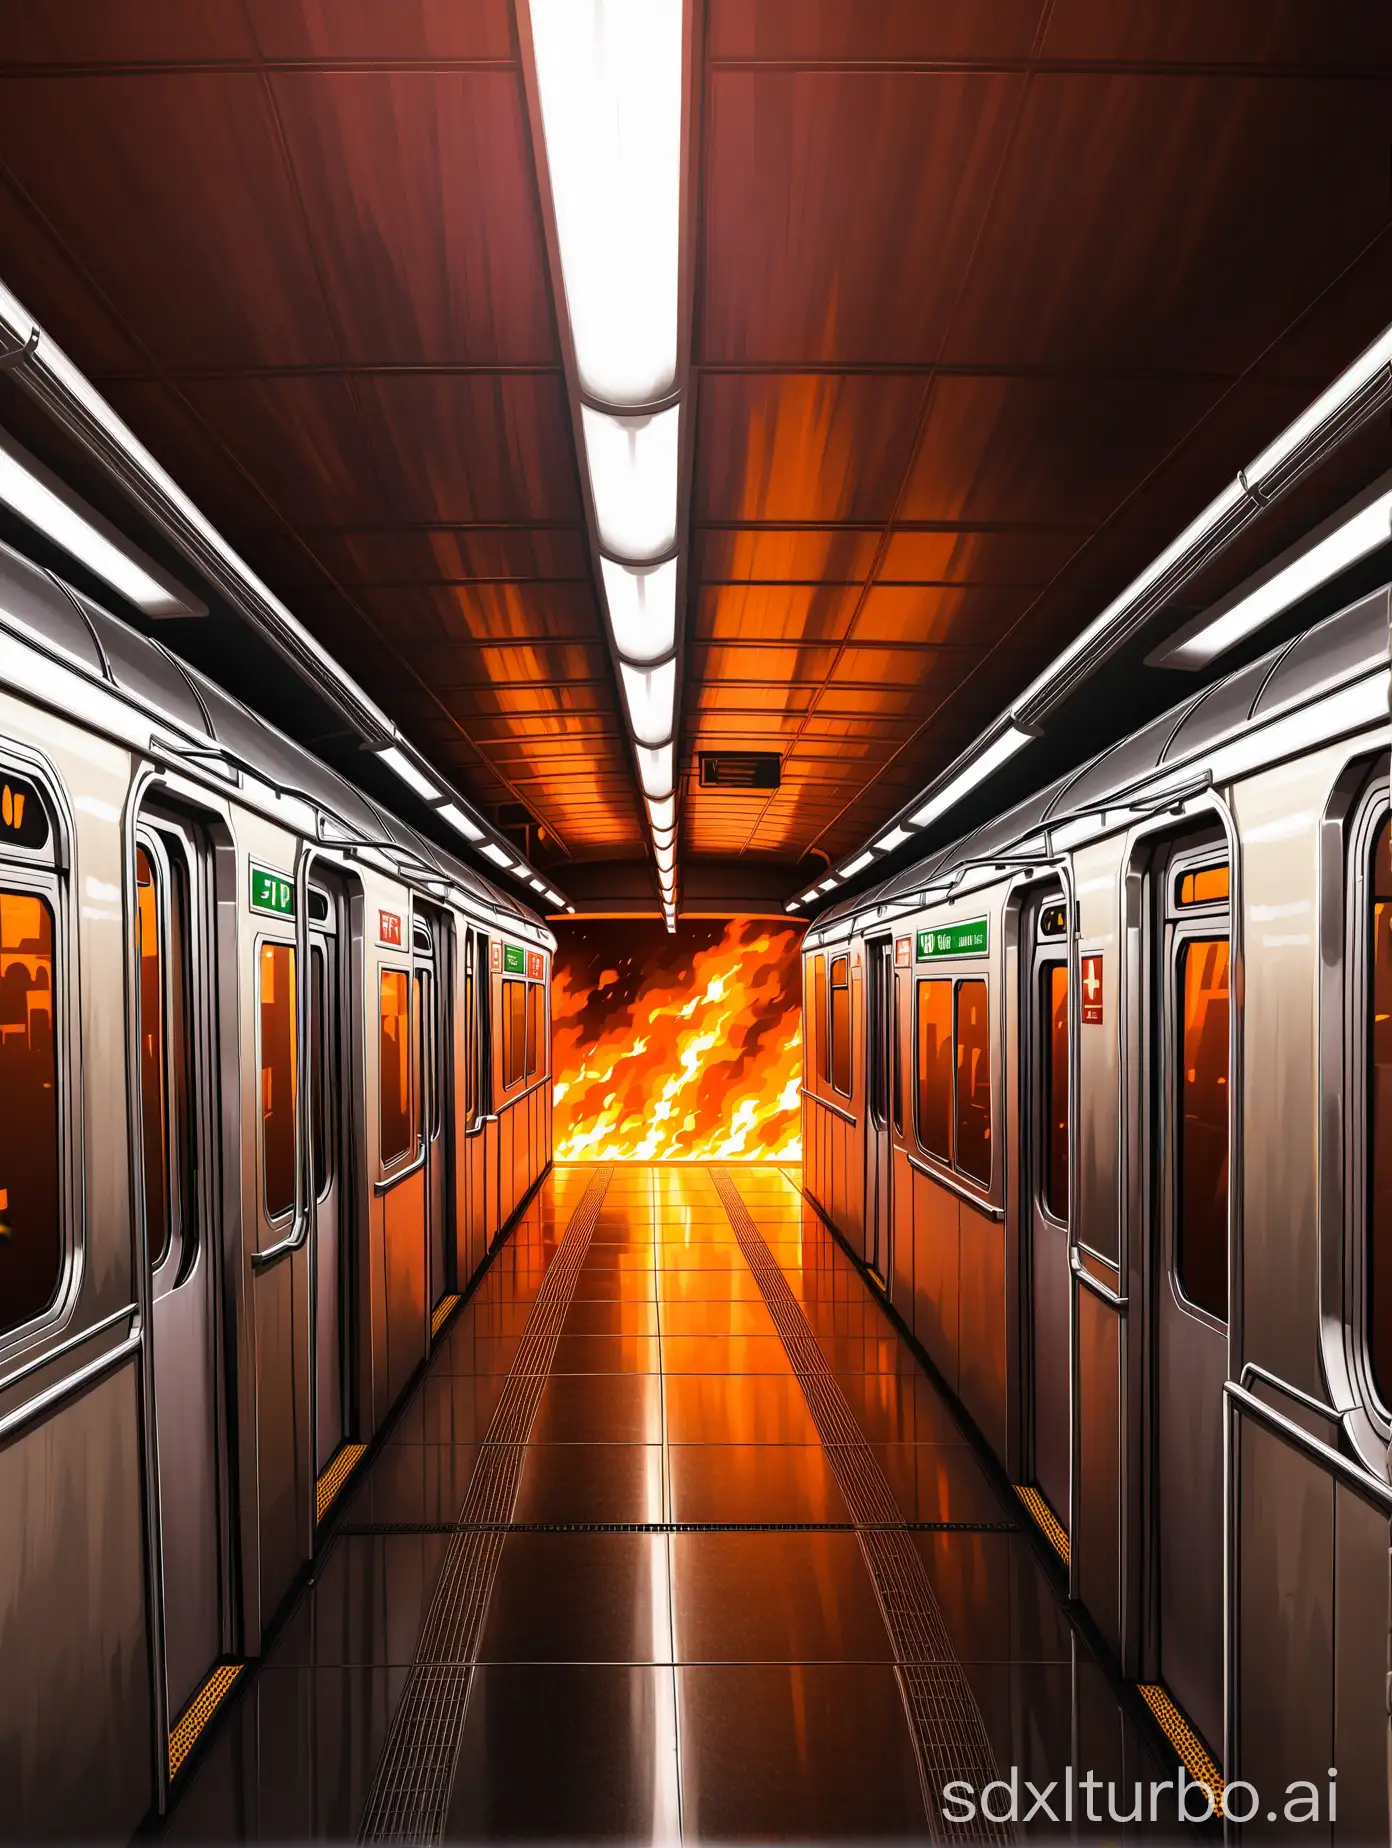 The interior of the subway on fire.